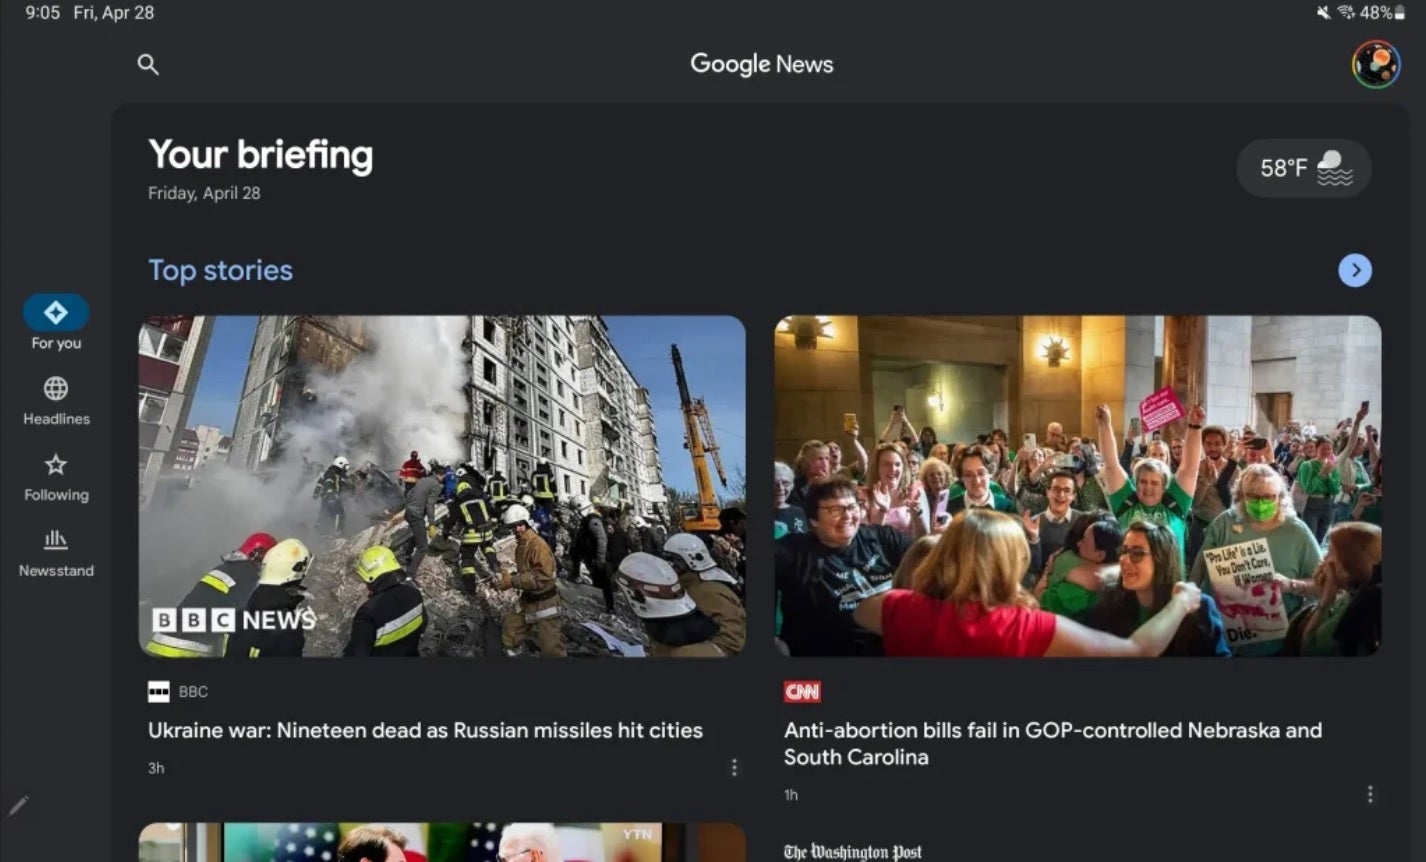 Google News tablet version of the app. Image credit 9to5 Google - Google News smartphone app gets limited Material You makeover